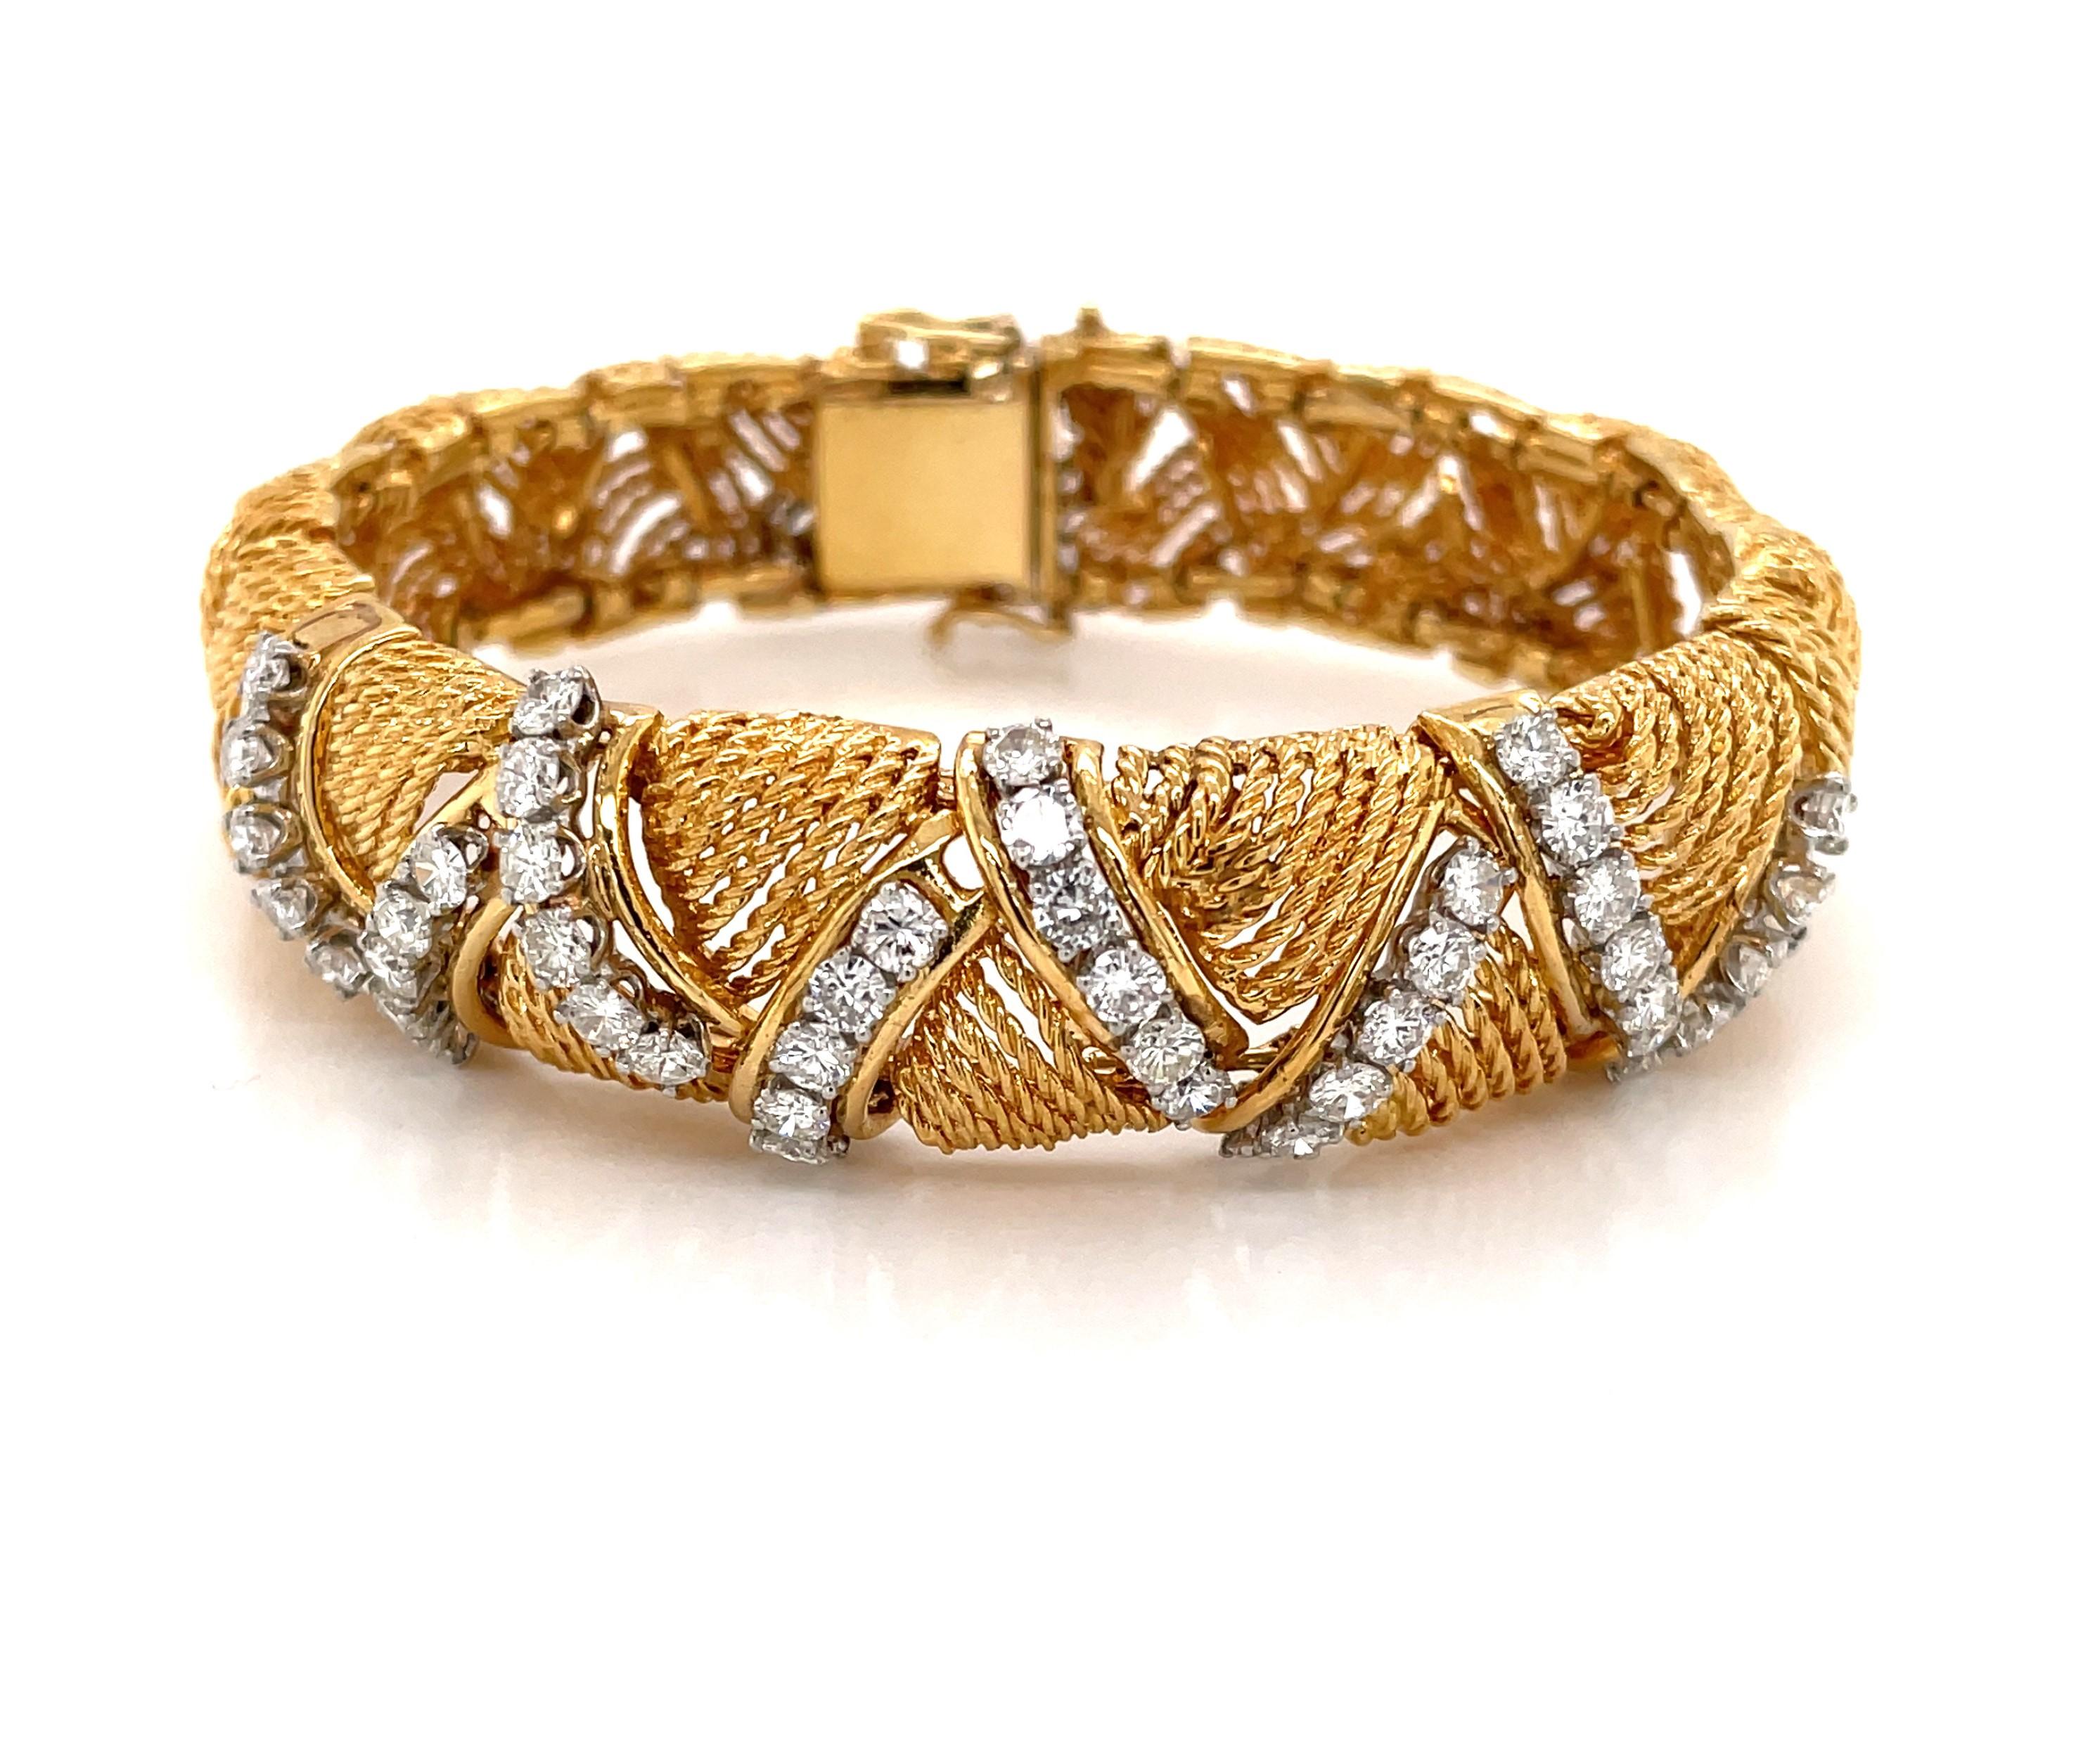 Glamorous and intricate 1950's woven 18K yellow gold rope bracelet with exciting diamond encrusted cross-lashing front detail feature. A fabulous period piece with lots of genuine sparkle that creates a truly electric look in woven eighteen karat